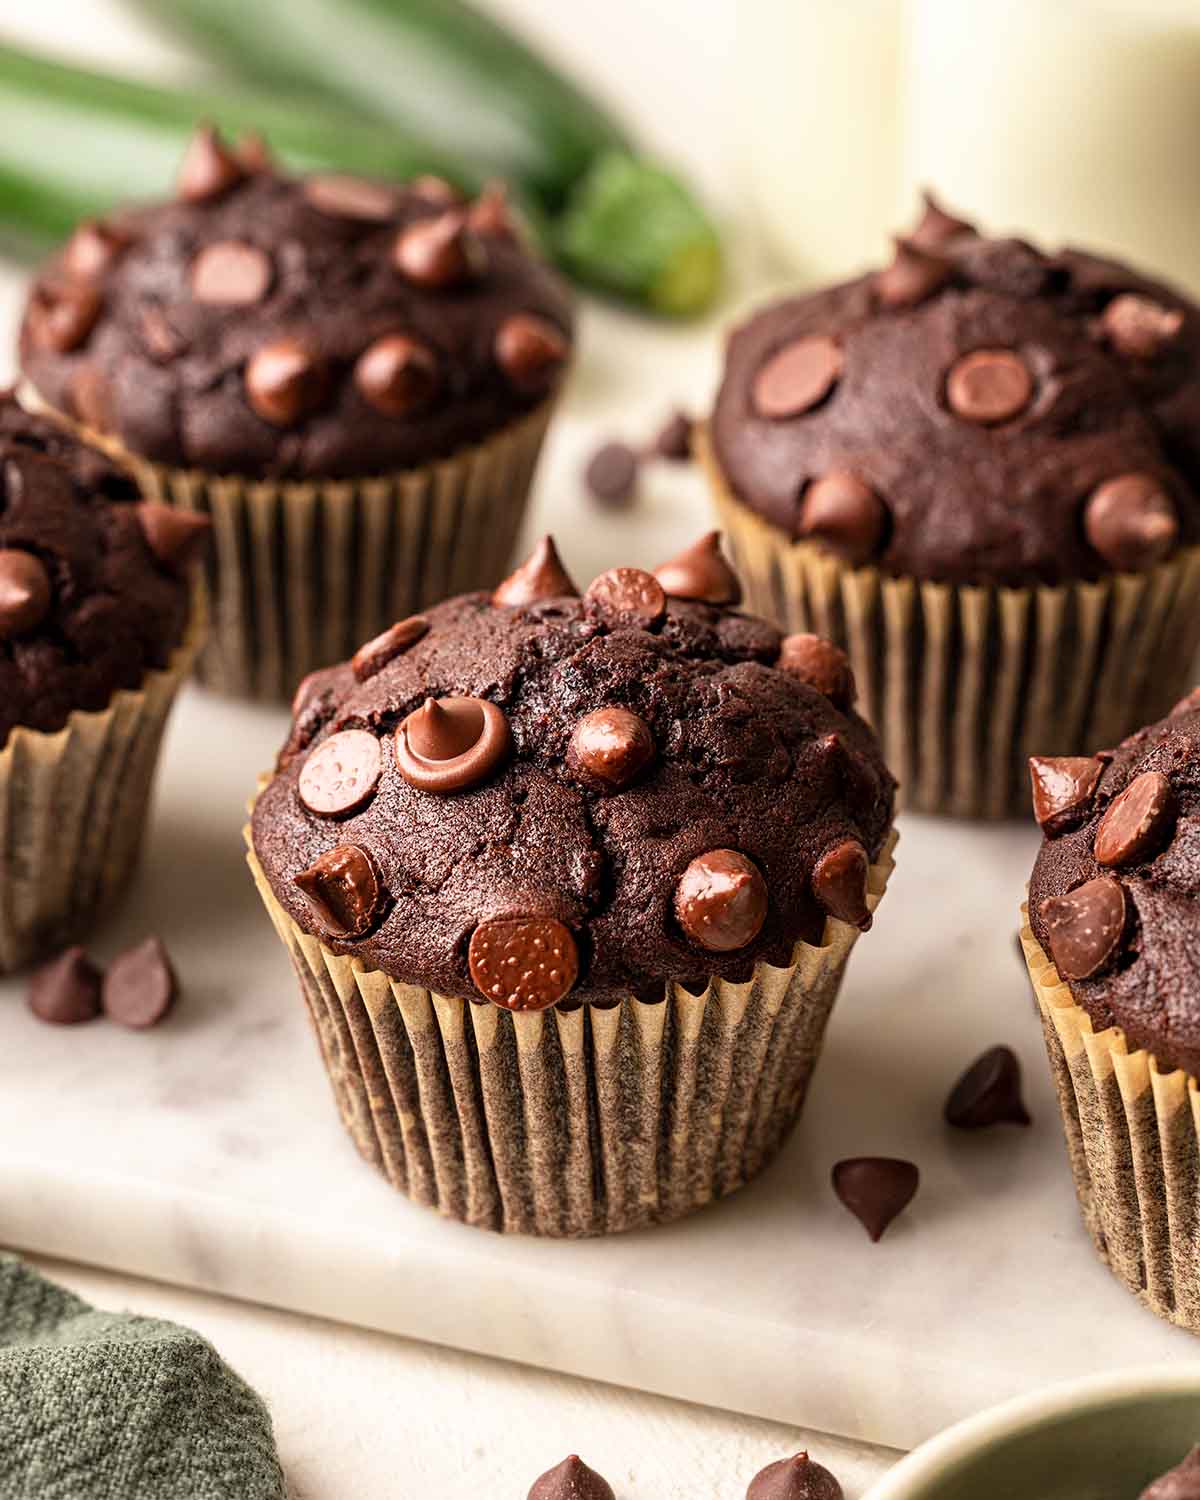 A few chocolate muffins on marble serving board, surrounded with chocolate chips.